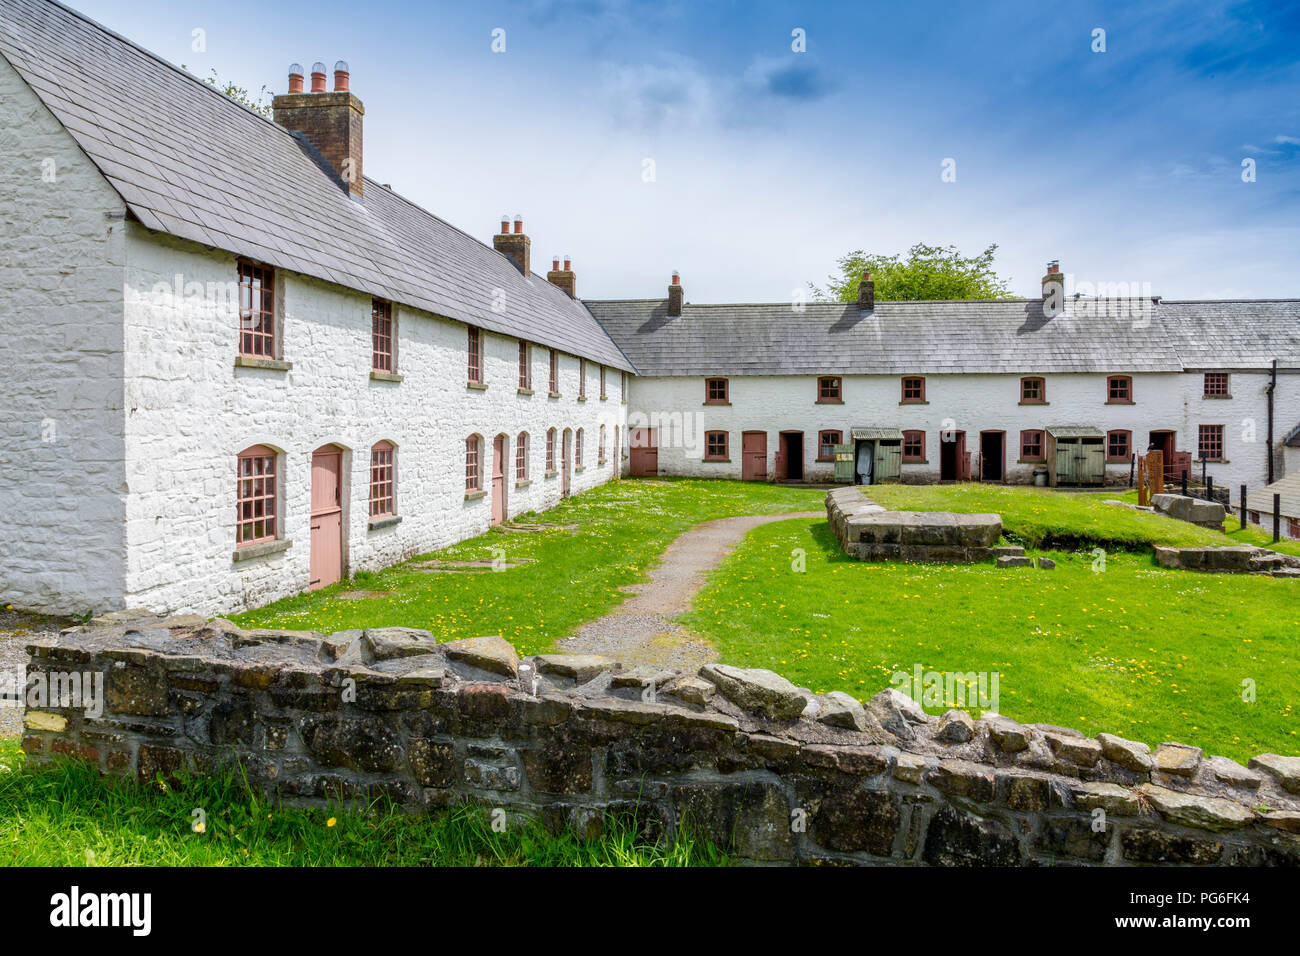 Stack Square worker's cottages preserved at Blaenavon Ironworks, now a museum and UNESCO World Heritage Site in Blaenavon, Gwent, Wales, UK Stock Photo